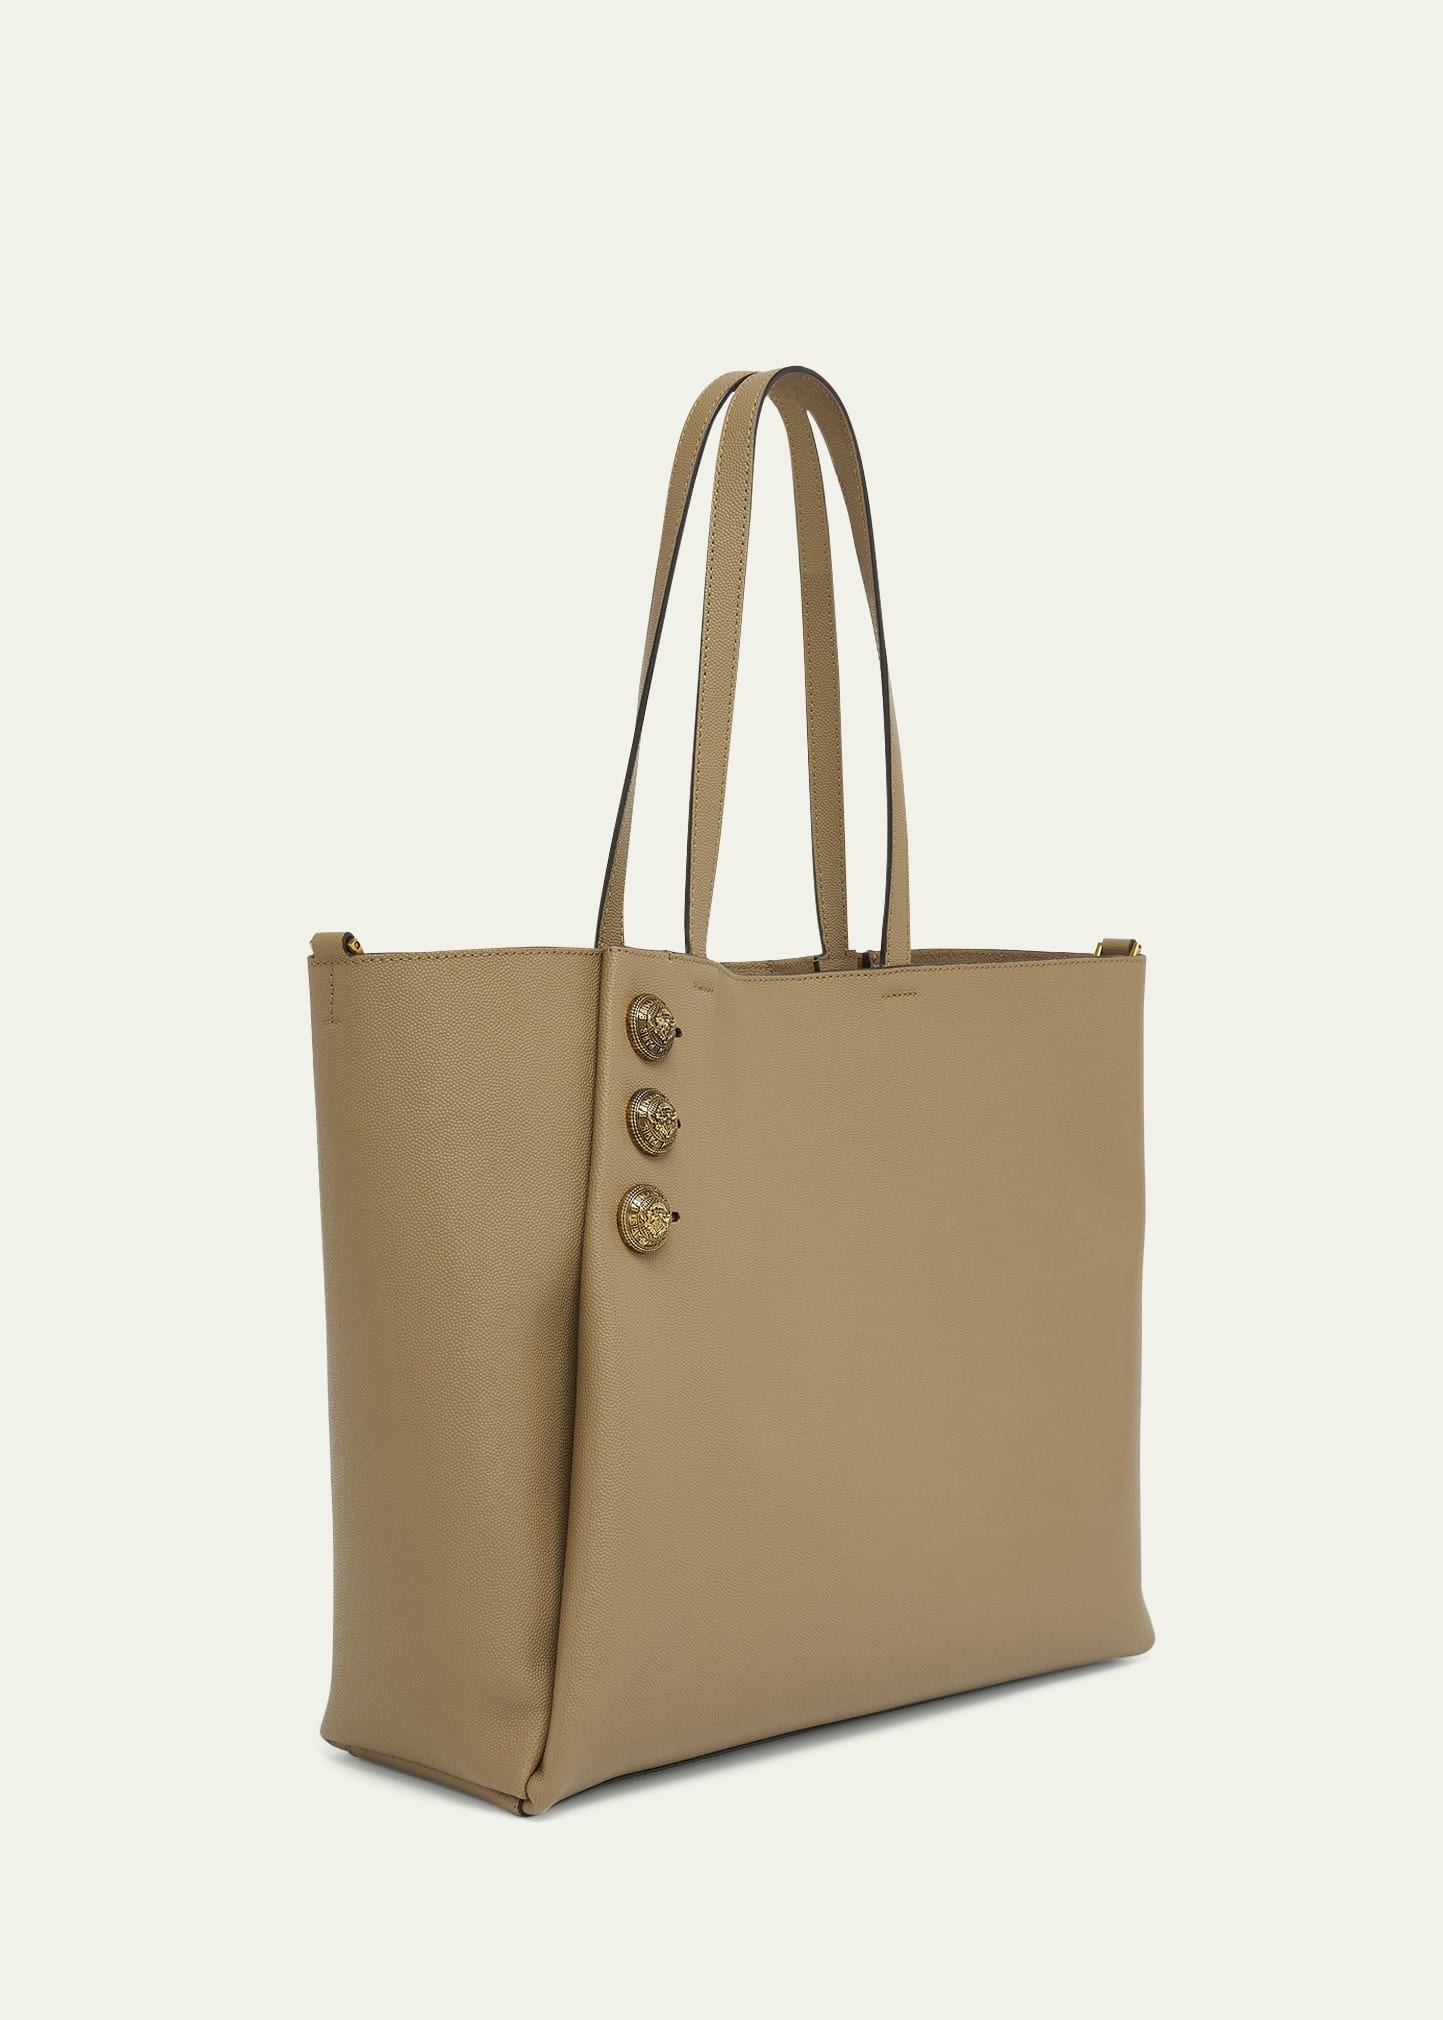 Embleme Shopper Tote Bag in Grained Leather - 3